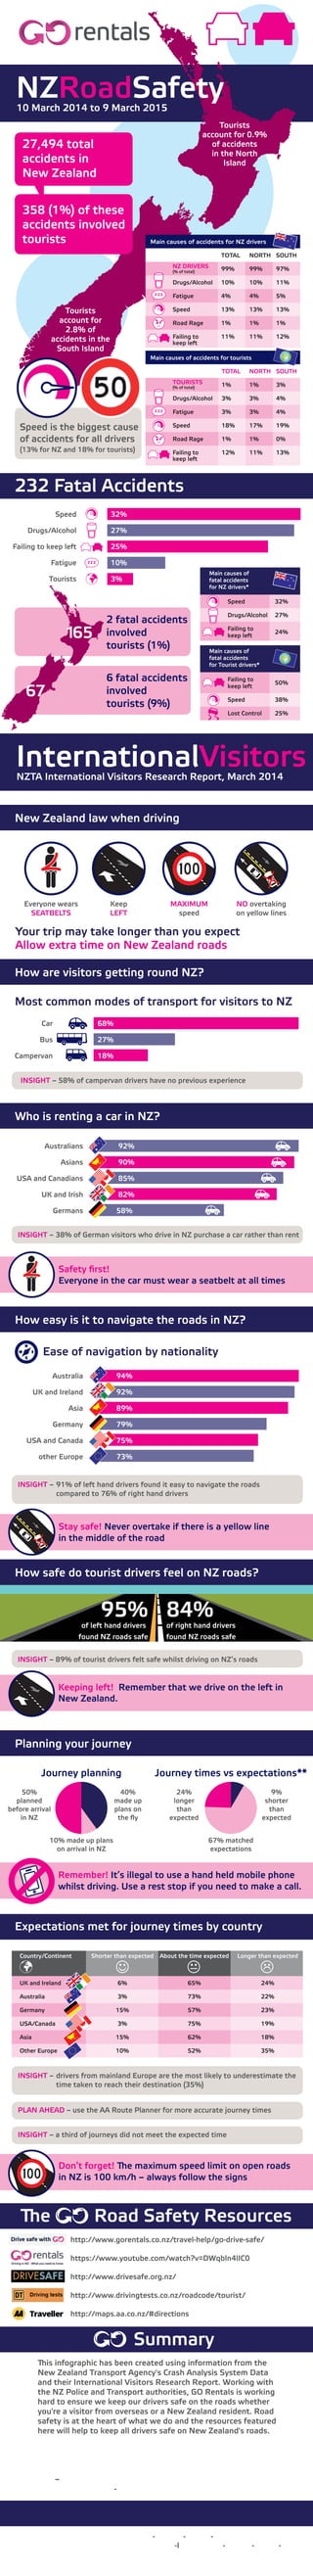 New Zealand law when driving
Your trip may take longer than you expect
Allow extra time on New Zealand roads
Everyone wears
SEATBELTS
Keep
LEFT
MAXIMUM
speed
NO overtaking
on yellow lines
95%
of left hand drivers
found NZ roads safe
84%
of right hand drivers
found NZ roads safe
e Sources
NZRoadSafety
Main causes of accidents for NZ drivers
TOTAL NORTH SOUTH
NZ DRIVERS 99% 99% 97%
Drugs/Alcohol 10% 10% 11%
Fatigue 4% 4% 5%
Speed 13% 13% 13%
Road Rage 1% 1% 1%
Failing to 11% 11% 12%
keep left
TOTAL NORTH SOUTH
TOURISTS 1% 1% 3%
Drugs/Alcohol 3% 3% 4%
Fatigue 3% 3% 4%
Speed 18% 17% 19%
Road Rage 1% 1% 0%
Failing to 12% 11% 13%
keep left
Main causes of accidents for tourists
Speed is the biggest cause
of accidents for all drivers
(13% for NZ and 18% for tourists)
Tourists
account for 0.9%
of accidents
in the North
Island
232 Fatal Accidents
Main causes of
fatal accidents
for NZ drivers*
Speed 32%
Drugs/Alcohol 27%
Failing to
keep left
24%
Main causes of
fatal accidents
for Tourist drivers*
Failing to
keep left
50%
Speed 38%
Lost Control 25%
10 March 2014 to 9 March 2015
InternationalVisitorsNZTA International Visitors Research Report, March 2014
27,494 total
accidents in
New Zealand
358 (1%) of these
accidents involved
tourists
INSIGHT – 89% of tourist drivers felt safe whilst driving on NZ’s roads
How are visitors getting round NZ?
Who is renting a car in NZ?
INSIGHT – 58% of campervan drivers have no previous experience
Car
Bus
Campervan
68%
27%
18%
Most common modes of transport for visitors to NZ
Australians
Asians
USA and Canadians
UK and Irish
Germans
INSIGHT – 38% of German visitors who drive in NZ purchase a car rather than rent
Safety ﬁrst!
Everyone in the car must wear a seatbelt at all times
How easy is it to navigate the roads in NZ?
How safe do tourist drivers feel on NZ roads?
Planning your journey
Australia
UK and Ireland
Asia
Germany
USA and Canada
other Europe
94%
92%
89%
79%
75%
73%
INSIGHT – 91% of left hand drivers found it easy to navigate the roads
compared to 76% of right hand drivers
Stay safe! Never overtake if there is a yellow line
in the middle of the road
Keeping left! Remember that we drive on the left in
New Zealand.
Ease of navigation by nationality
Expectations met for journey times by country
Country/Continent Shorter than expected About the time expected Longer than expected
UK and Ireland 6% 65% 24%
Australia 3% 73% 22%
Germany 15% 57% 23%
USA/Canada 3% 75% 19%
Asia 15% 62% 18%
Other Europe 10% 52% 35%
50%
planned
before arrival
in NZ
24%
longer
than
expected
Journey planning
40%
made up
plans on
the ﬂy
10% made up plans
on arrival in NZ
Journey times vs expectations**
9%
shorter
than
expected
67% matched
expectations
INSIGHT – drivers from mainland Europe are the most likely to underestimate the
time taken to reach their destination (35%)
PLAN AHEAD – use the AA Route Planner for more accurate journey times
INSIGHT – a third of journeys did not meet the expected time
Don’t forget! e maximum speed limit on open roads
in NZ is 100 km/h – always follow the signs
(% of total)
(% of total)
67
165
2 fatal accidents
involved
tourists (1%)
6 fatal accidents
involved
tourists (9%)
Speed
Drugs/Alcohol
Failing to keep left
Fatigue
Tourists
Speed
Drugs/Alcohol
Failing to keep left
Fatigue
Tourists
32%
27%
25%
10%
3%
92%
90%
85%
82%
58%
Remember! It’s illegal to use a hand held mobile phone
whilst driving. Use a rest stop if you need to make a call.
e Road Safety Resources
Summary
New Zealand Transport Agency's Crash Analysis System Data
and their International Visitors Research Report. Working with
the NZ Police and Transport authorities, GO Rentals is working
hard to ensure we keep our drivers safe on the roads whether
you're a visitor from overseas or a New Zealand resident. Road
safety is at the heart of what we do and the resources featured
here will help to keep all drivers safe on New Zealand's roads.
e data used to represent tourist drivers in this infographic is
taken from the Crash Analysis System Data coding system and
relates to the following code:
404 – Overseas / migrant driver fails to adjust to NZ road rules
and road conditions -
http://www.nzta.govt.nz/resources/crash-analysis-system-data/index.html
http://www.saferjourneys.govt.nz/assets/NZTA-International-Visitors-Report-Final.pdf
* ere can be multiple causes of a single accident e.g. speed and alcohol
** % of those respondents who provided an answer
http://www.gorentals.co.nz/travel-help/go-drive-safe/
https://www.youtube.com/watch?v=DWqbln4lIC0
http://www.drivesafe.org.nz/
http://www.drivingtests.co.nz/roadcode/tourist/
http://maps.aa.co.nz/#directions
Tourists
account for
2.8% of
accidents in the
South Island
 